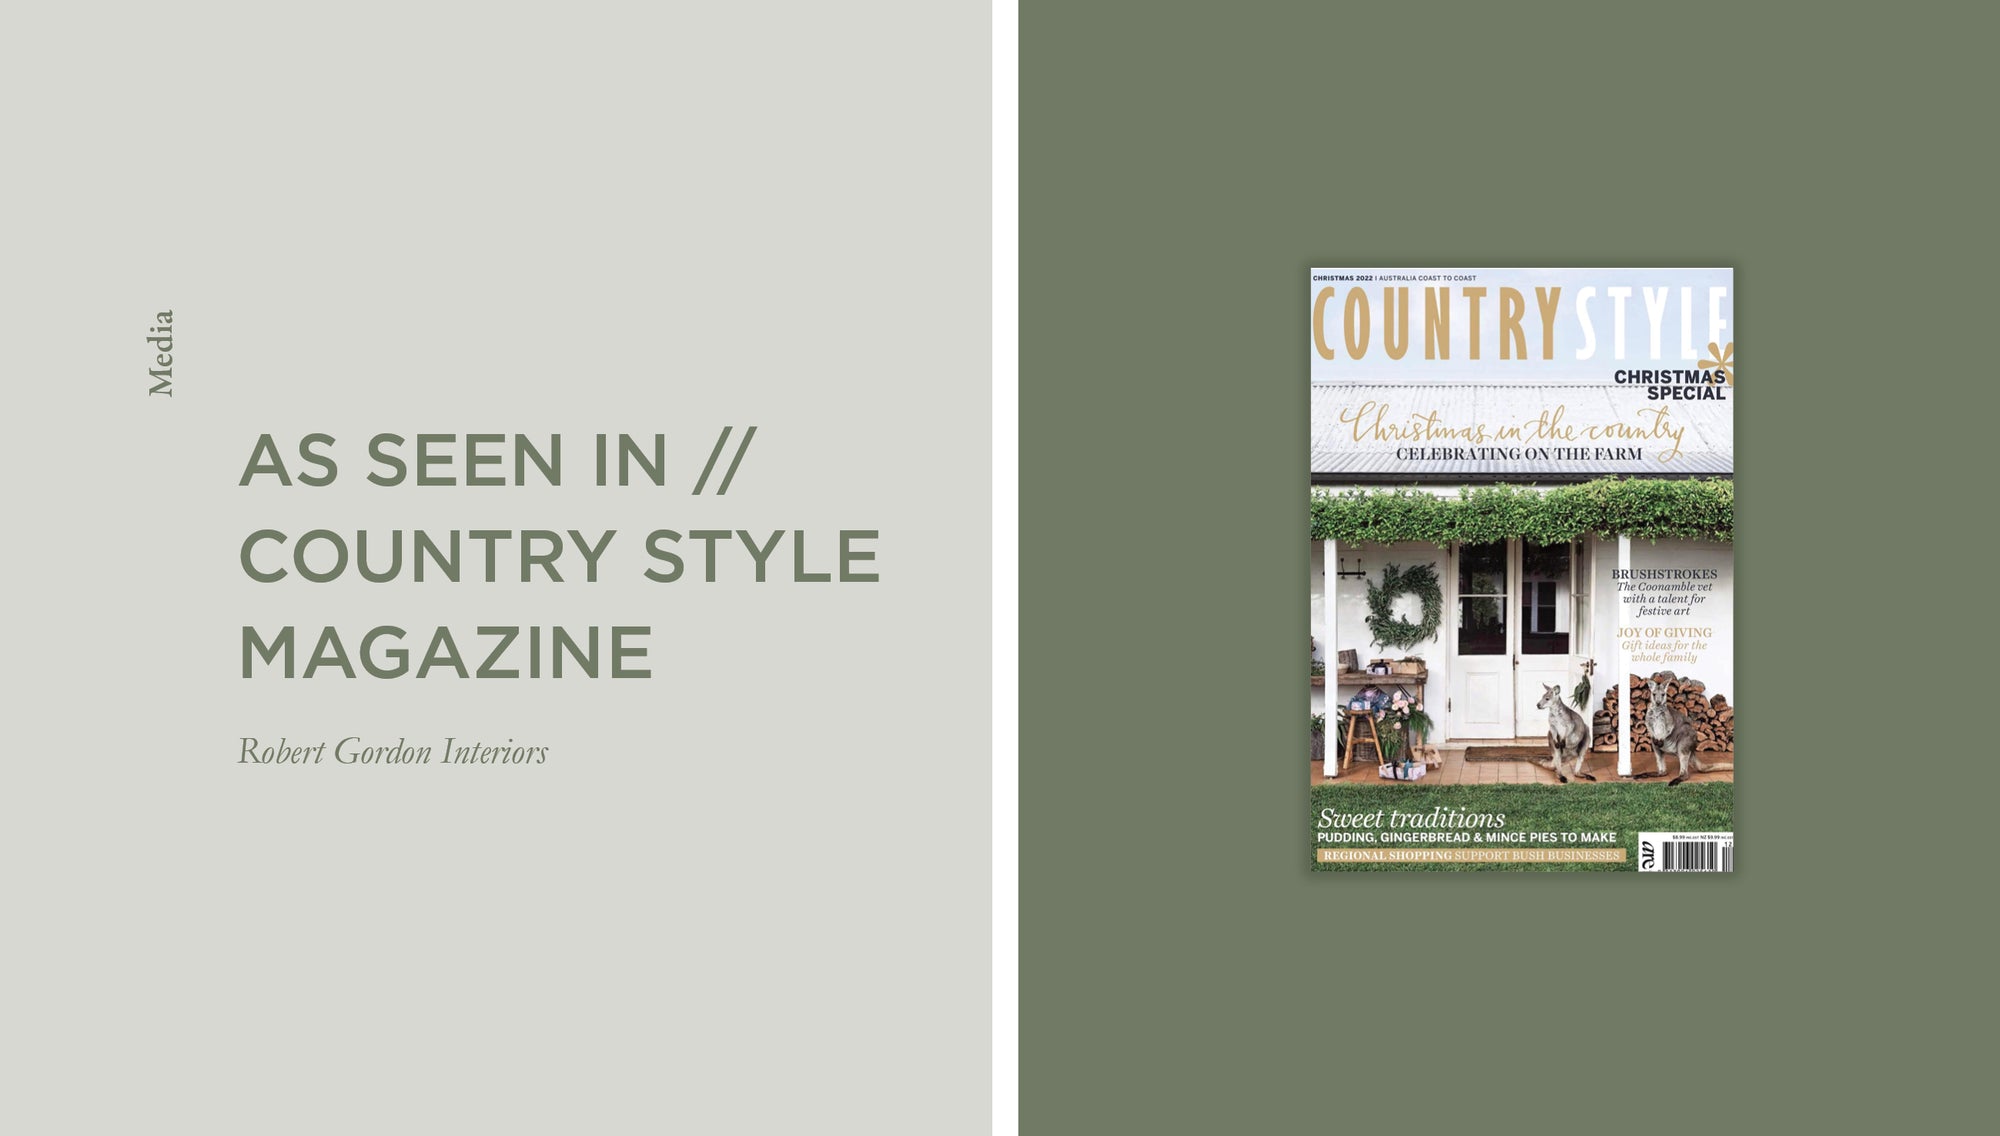 As seen in // Country Style Magazine